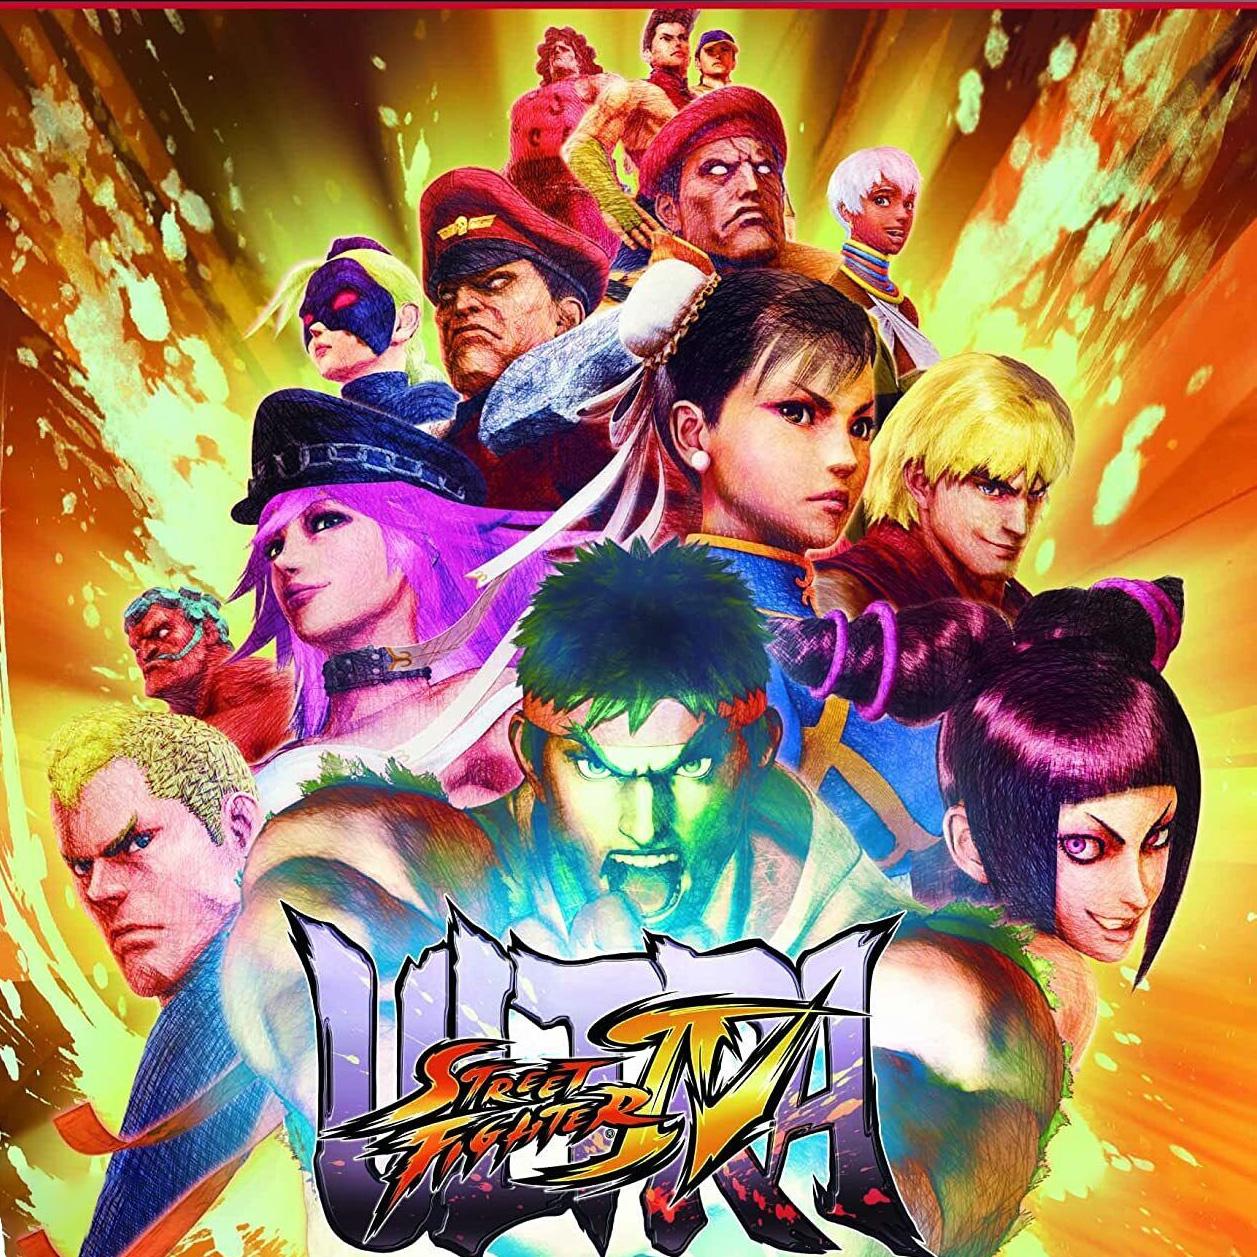 Ultra Street Fighter IV PC Download for $2